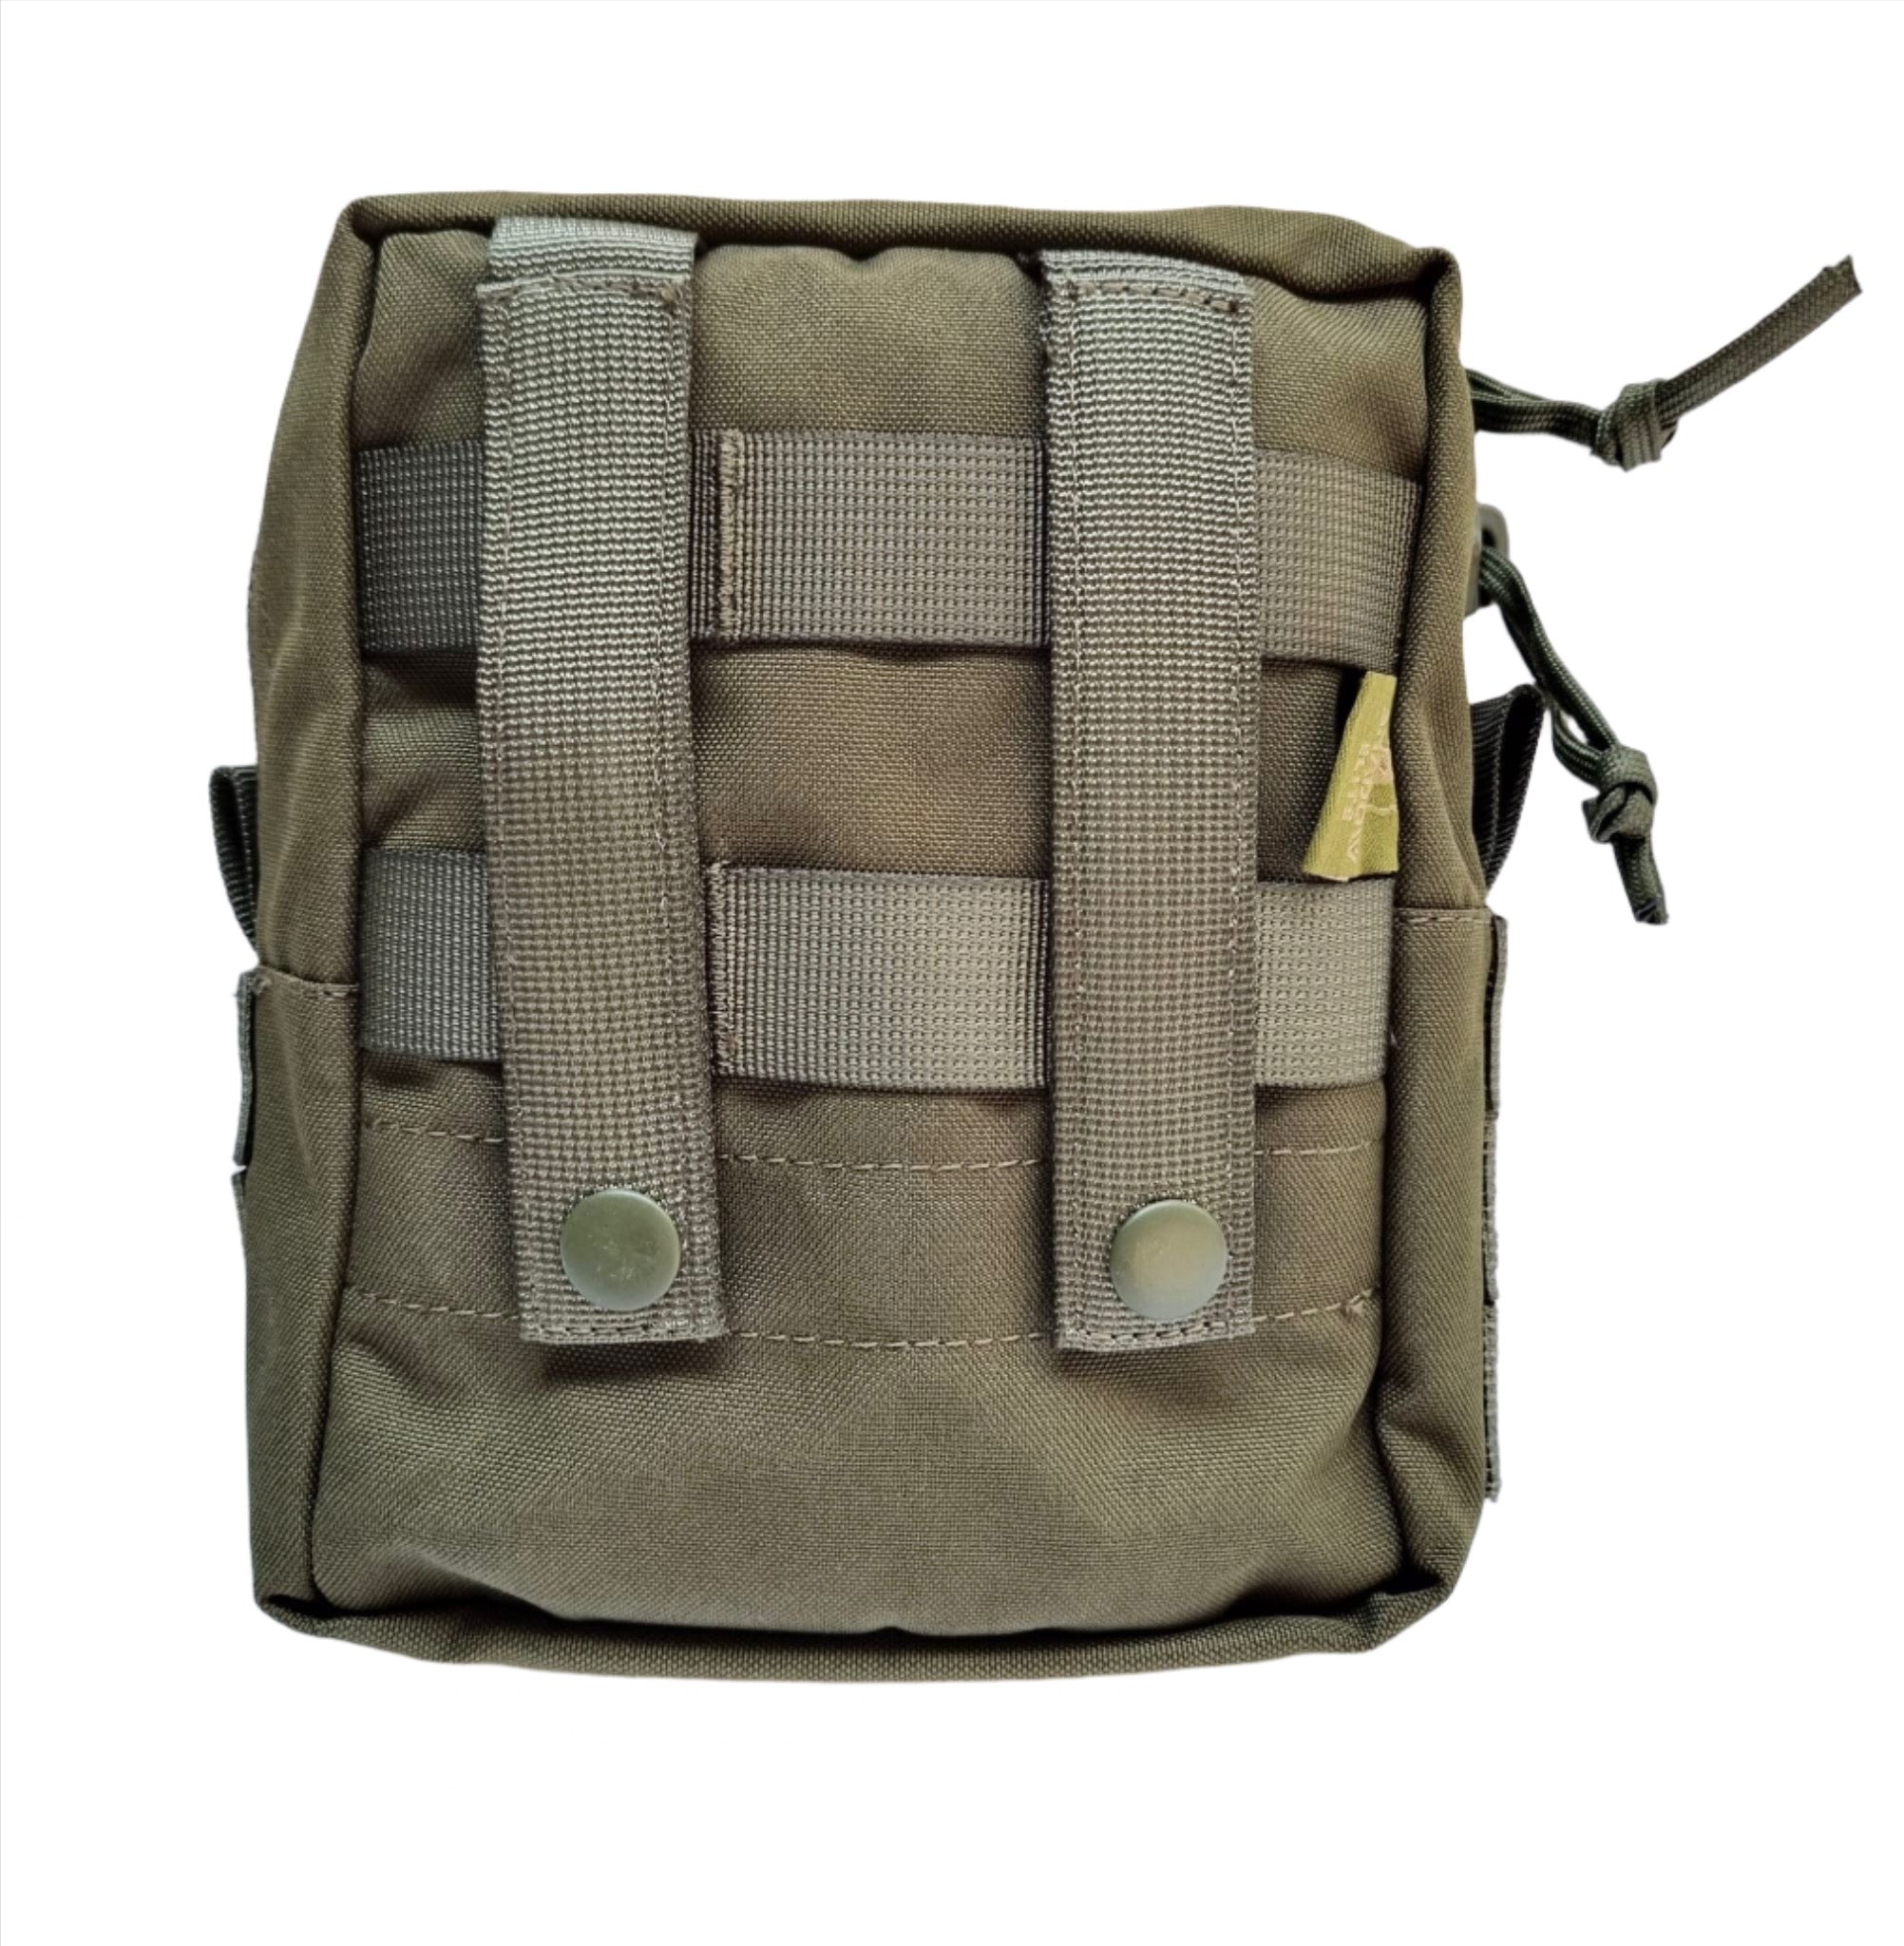  Shadow Strategic Multi Purpose Utility pouch  Color Olive Green